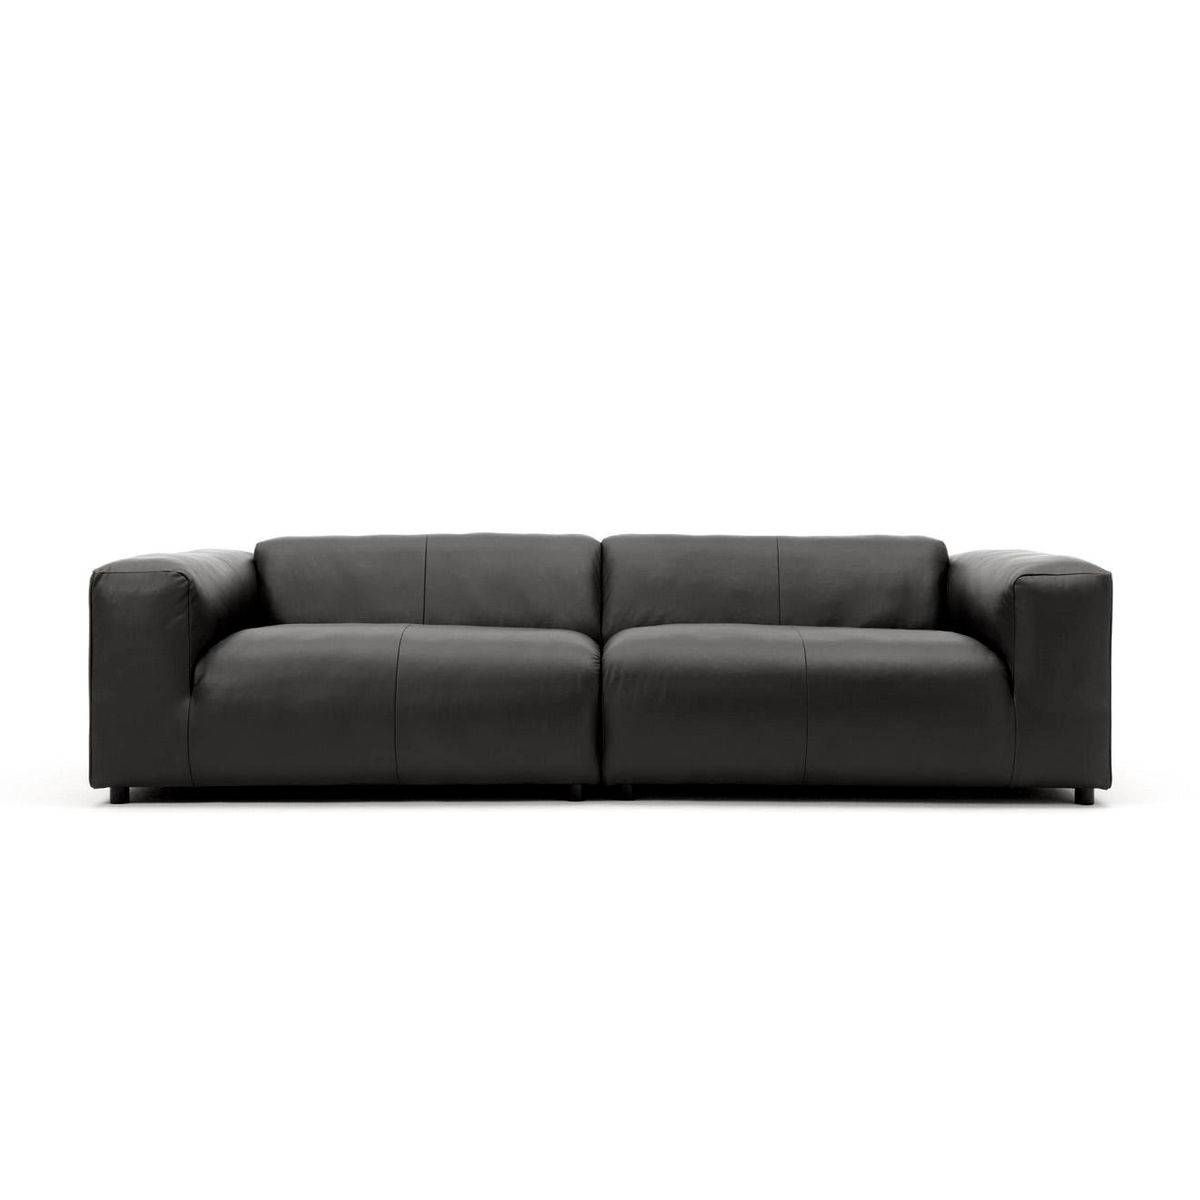 Freistil 187 3 Seater Leather Sofa | Freistil Rolf Benz In 3 Seater Leather Sofas (View 25 of 30)